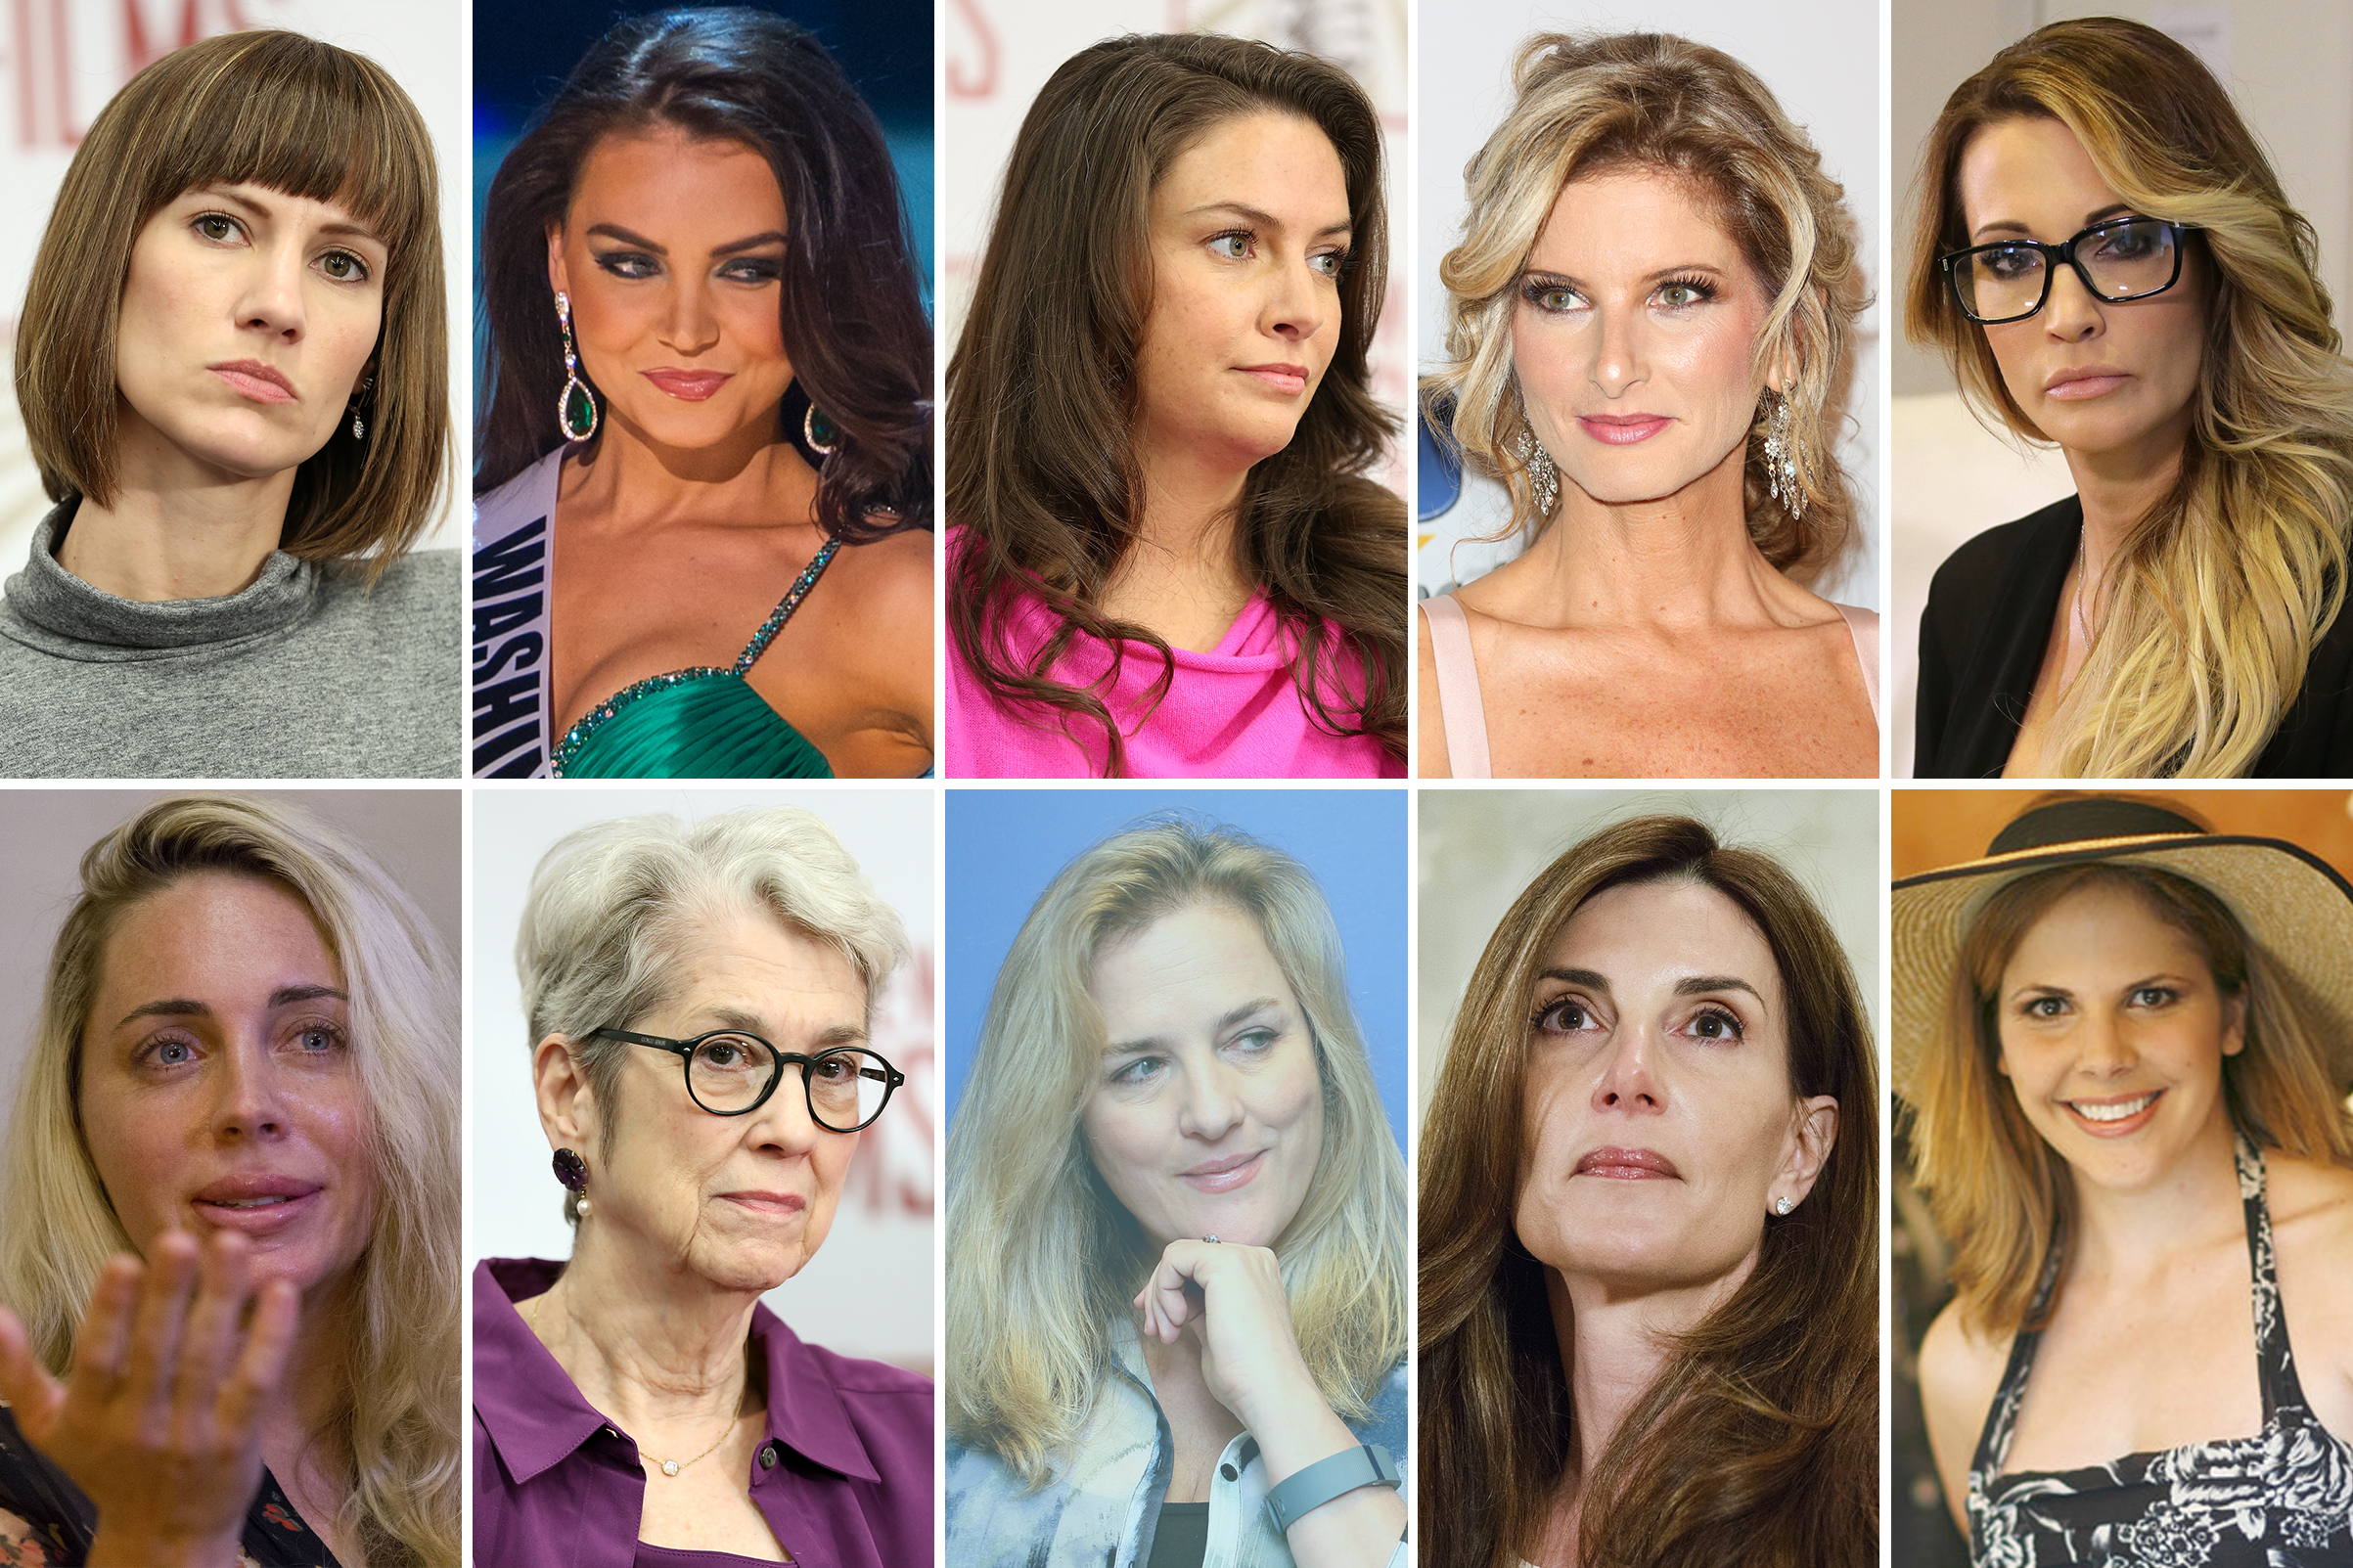 Donald Trump Accusers Women Who Alleged Sexual Misconduct Time 2